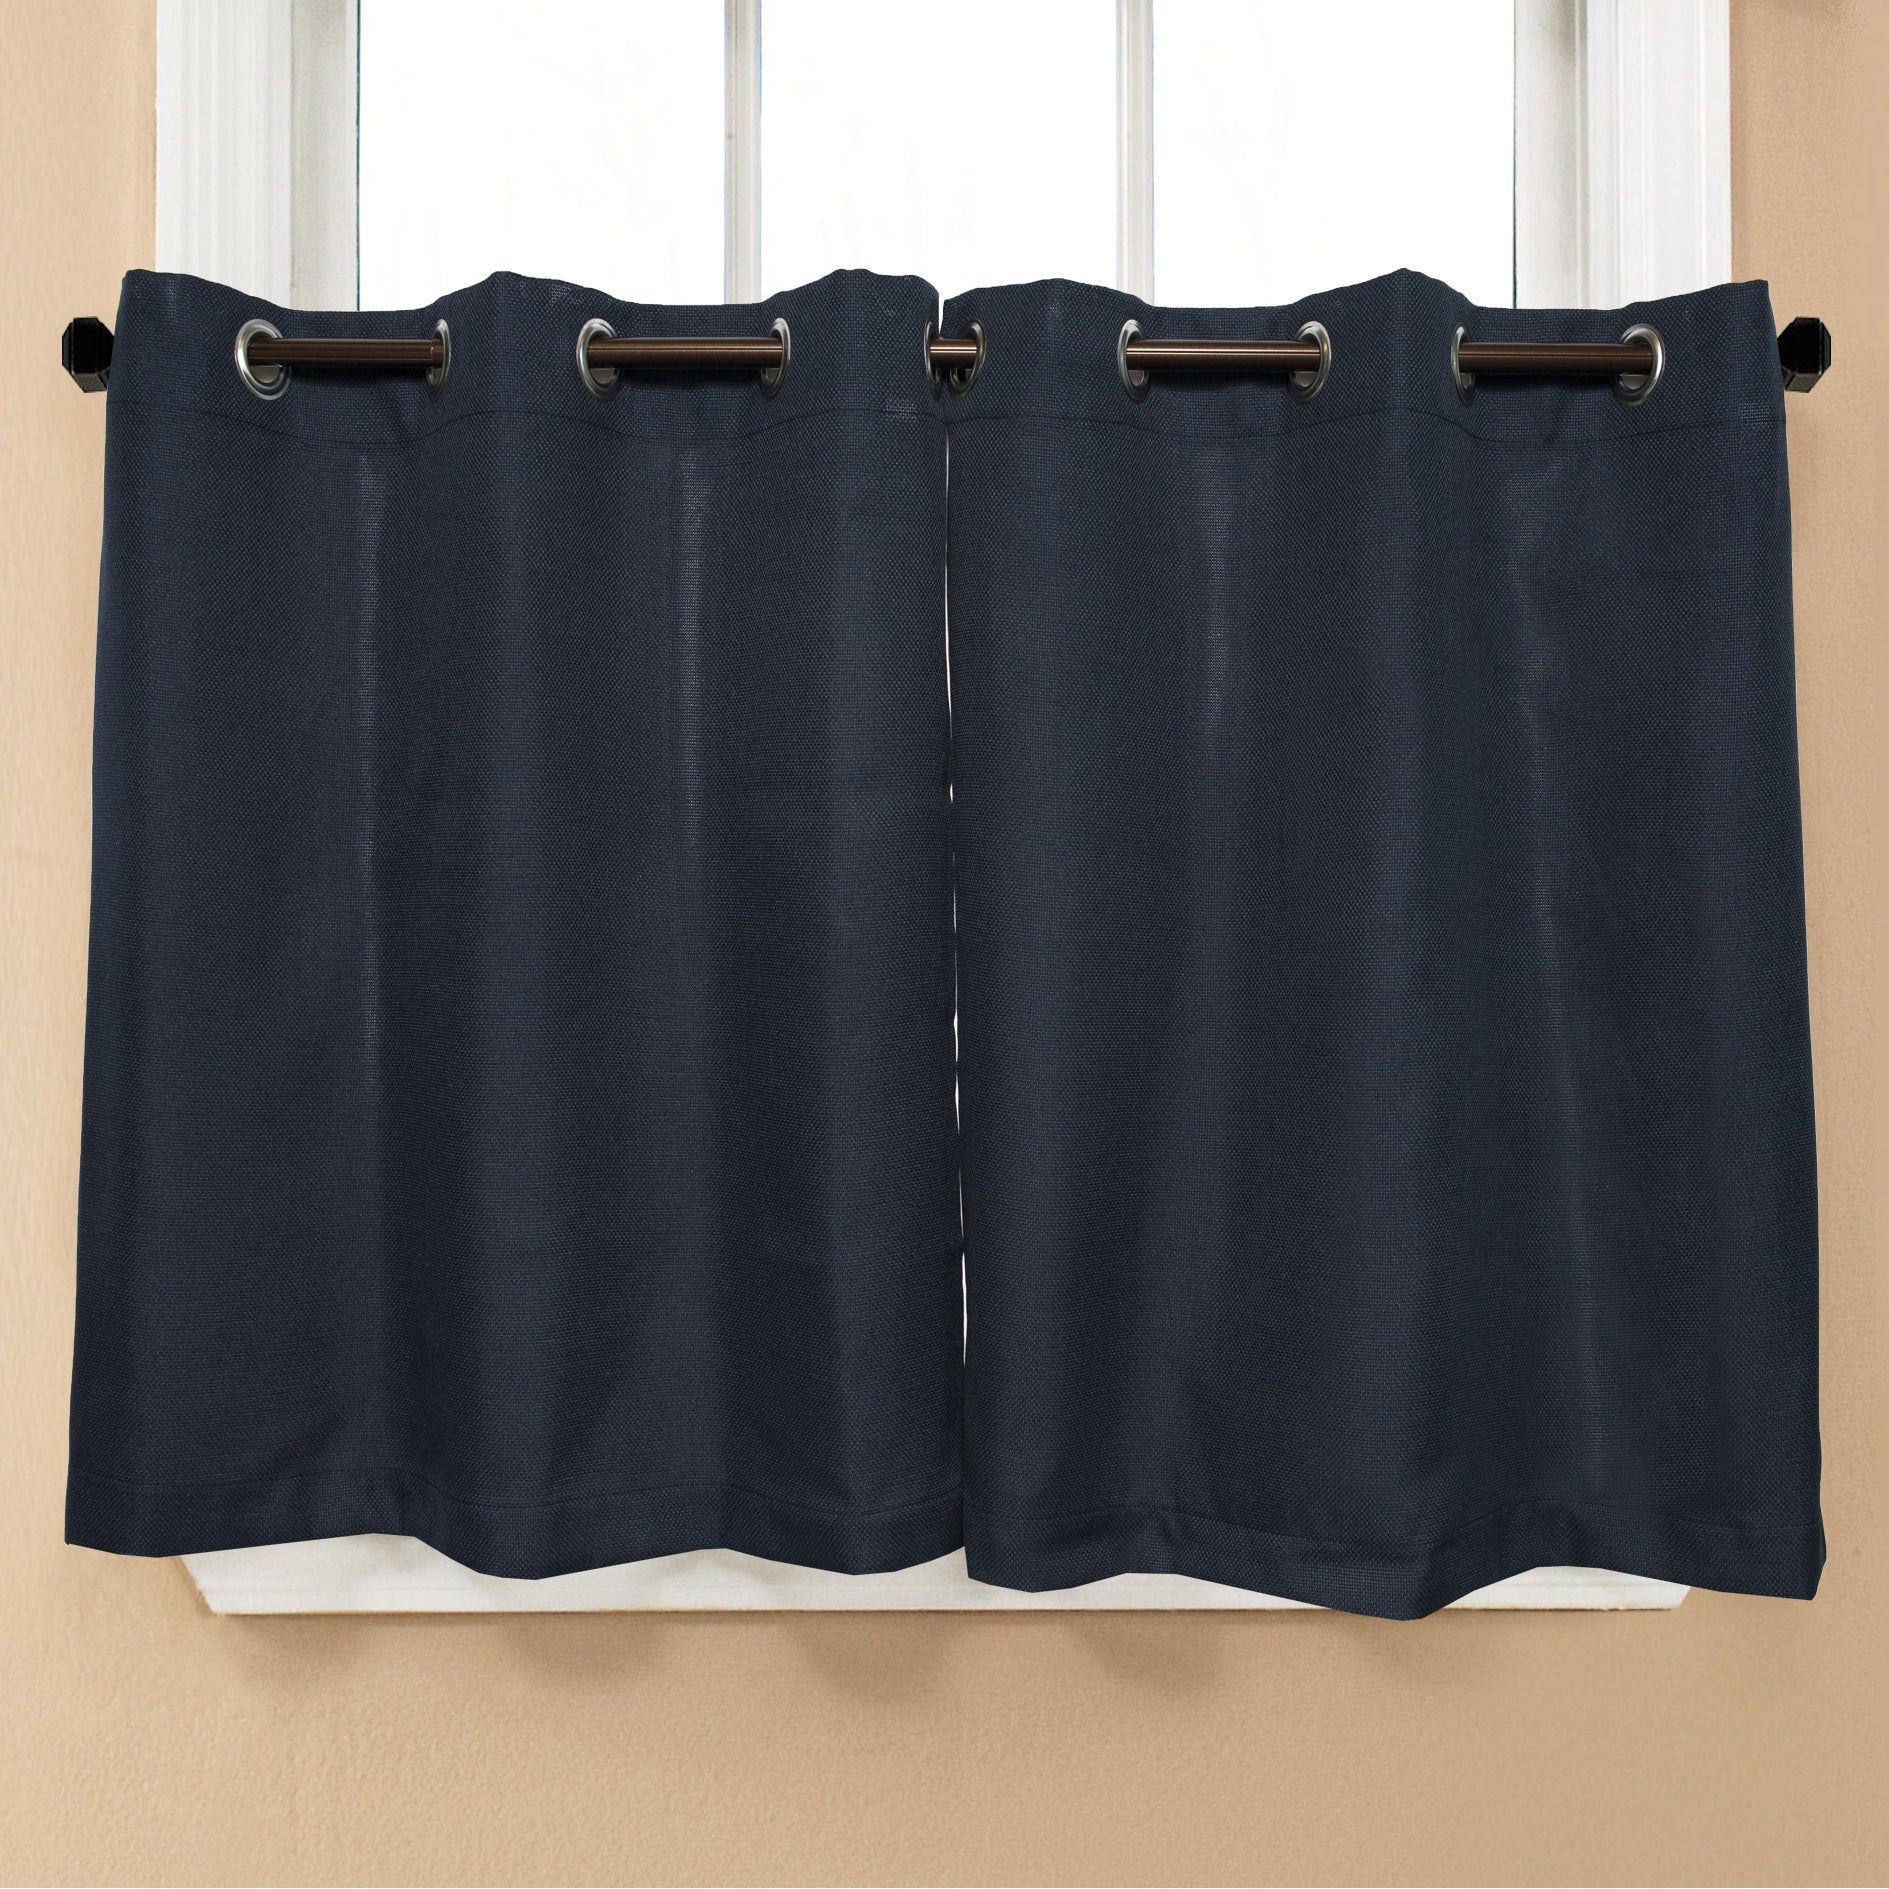 Modern Subtle Texture Solid Navy Kitchen Curtain Parts With Grommets  Tier  And Valance Options With Regard To Modern Subtle Texture Solid Red Kitchen Curtains (Photo 7 of 20)